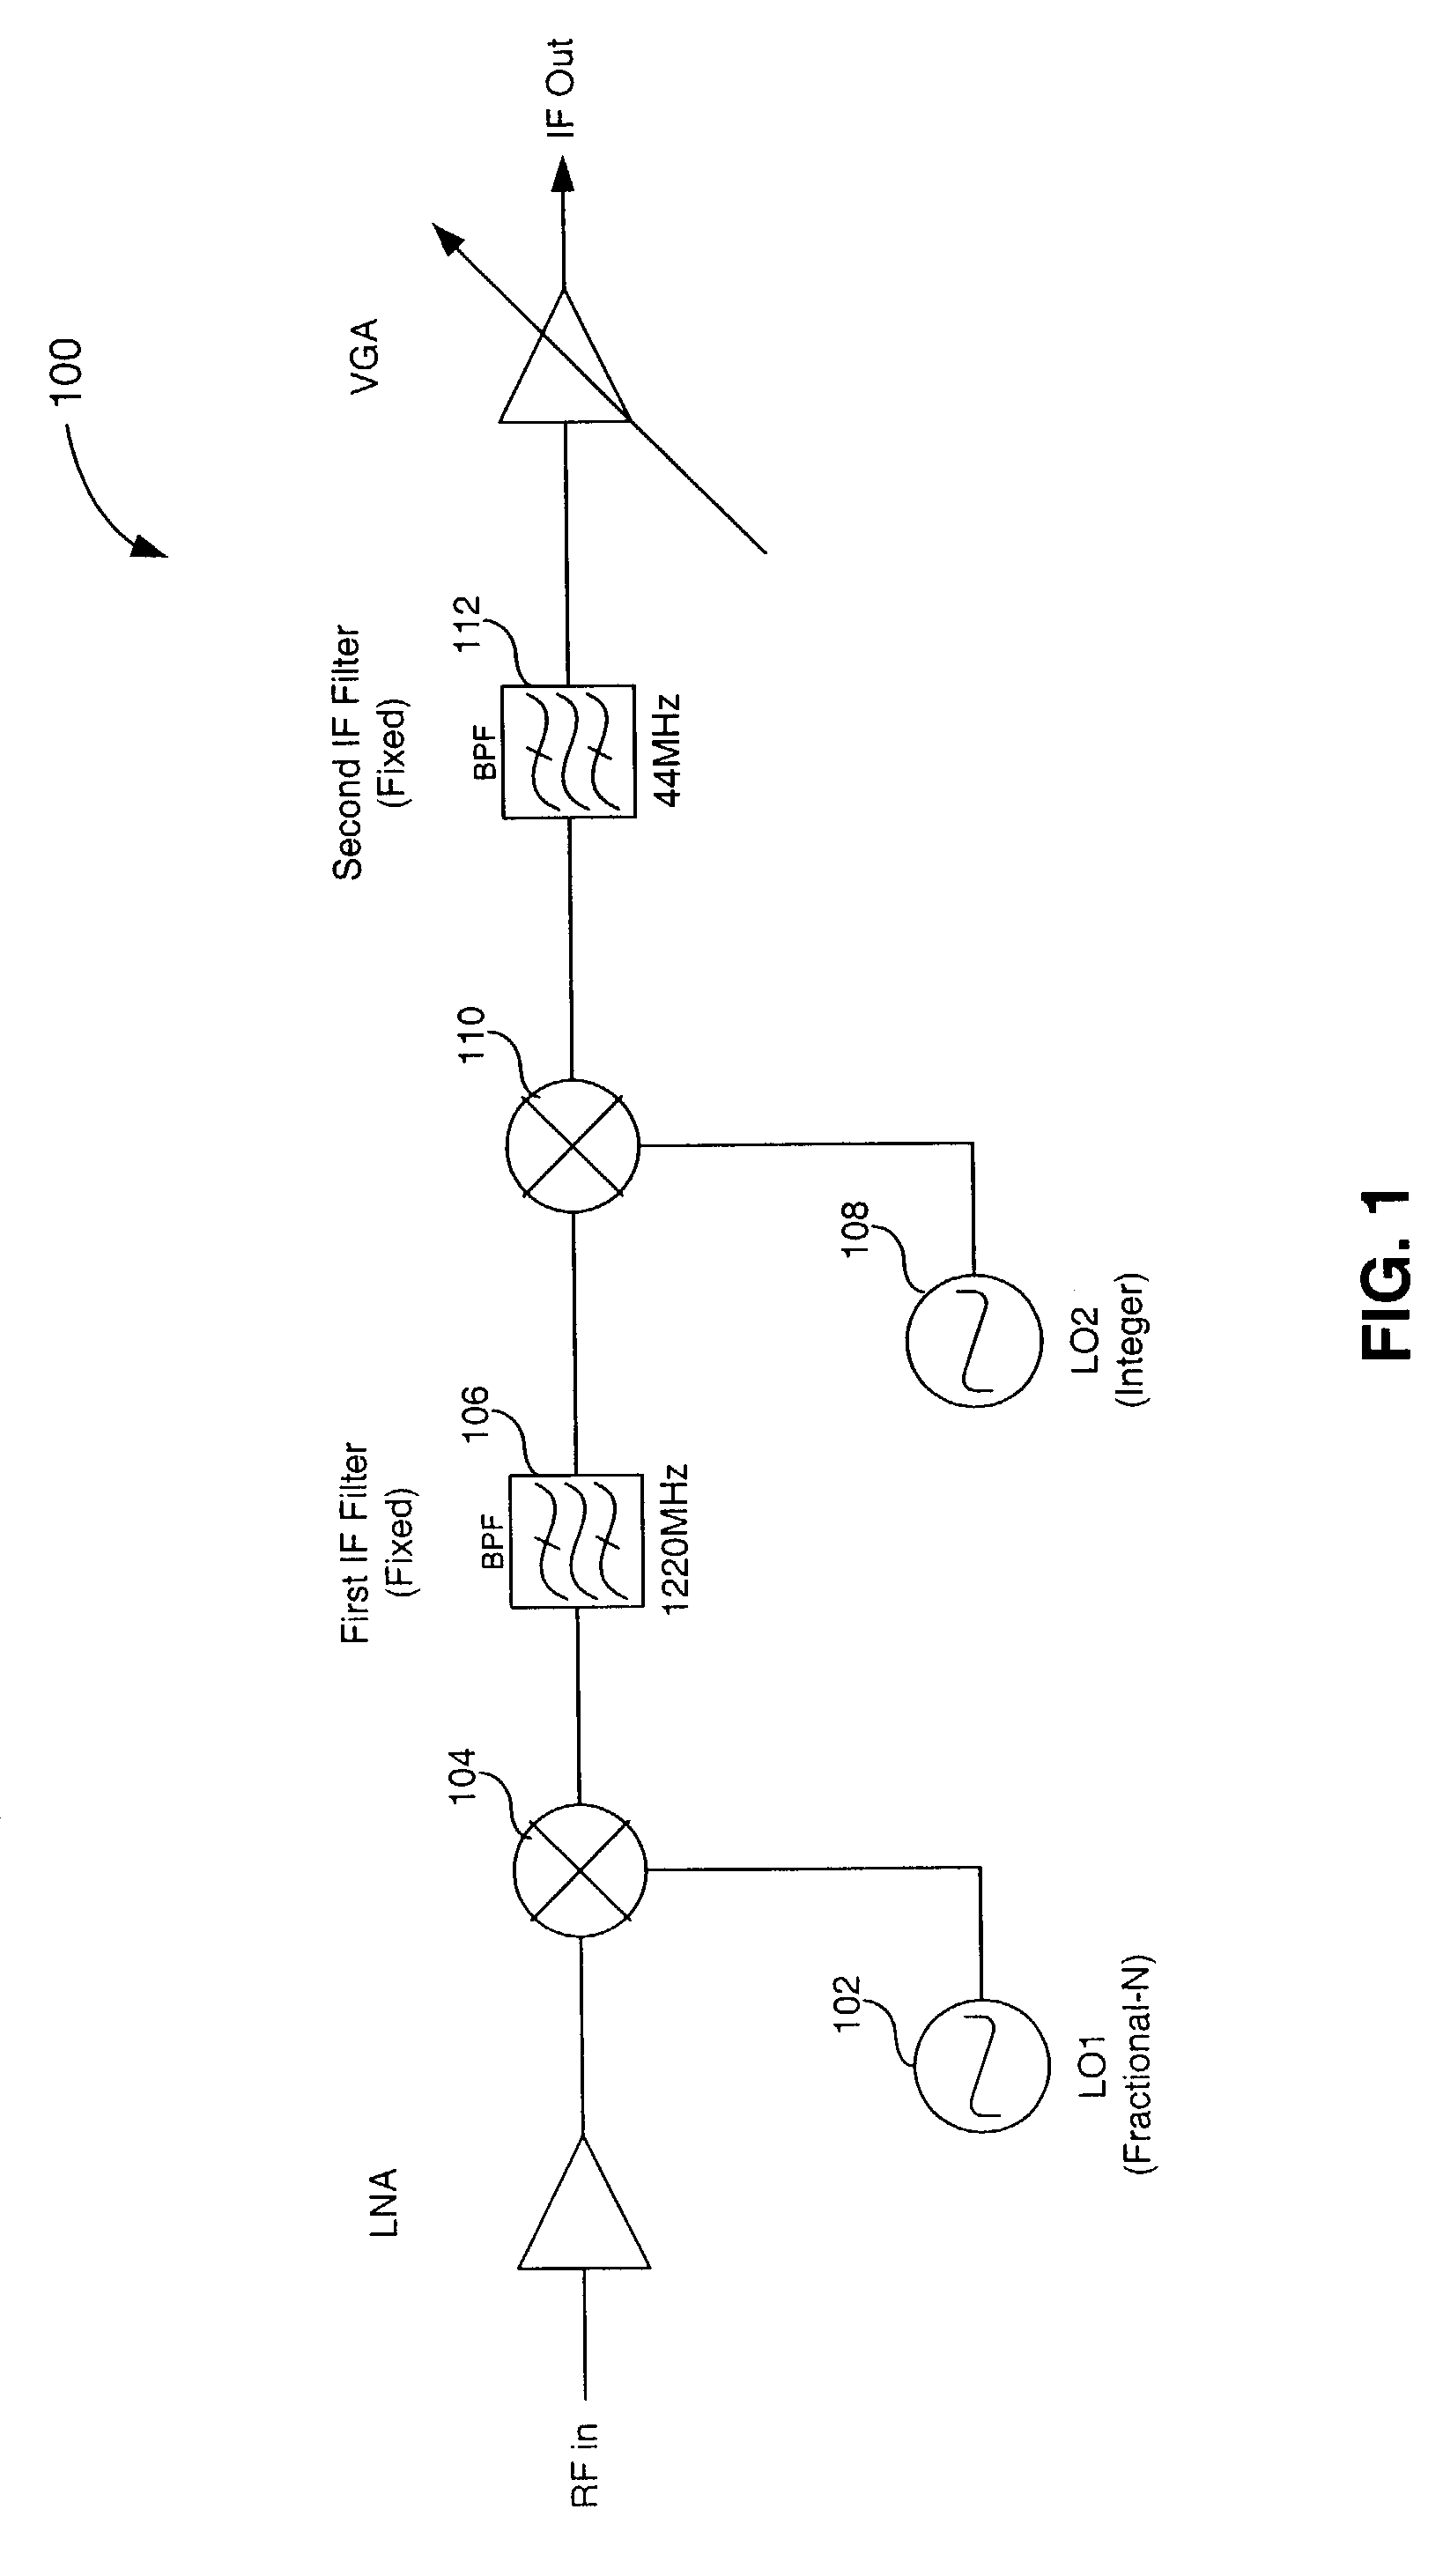 Double-conversion television tuner using a Delta-Sigma Fractional-N PLL